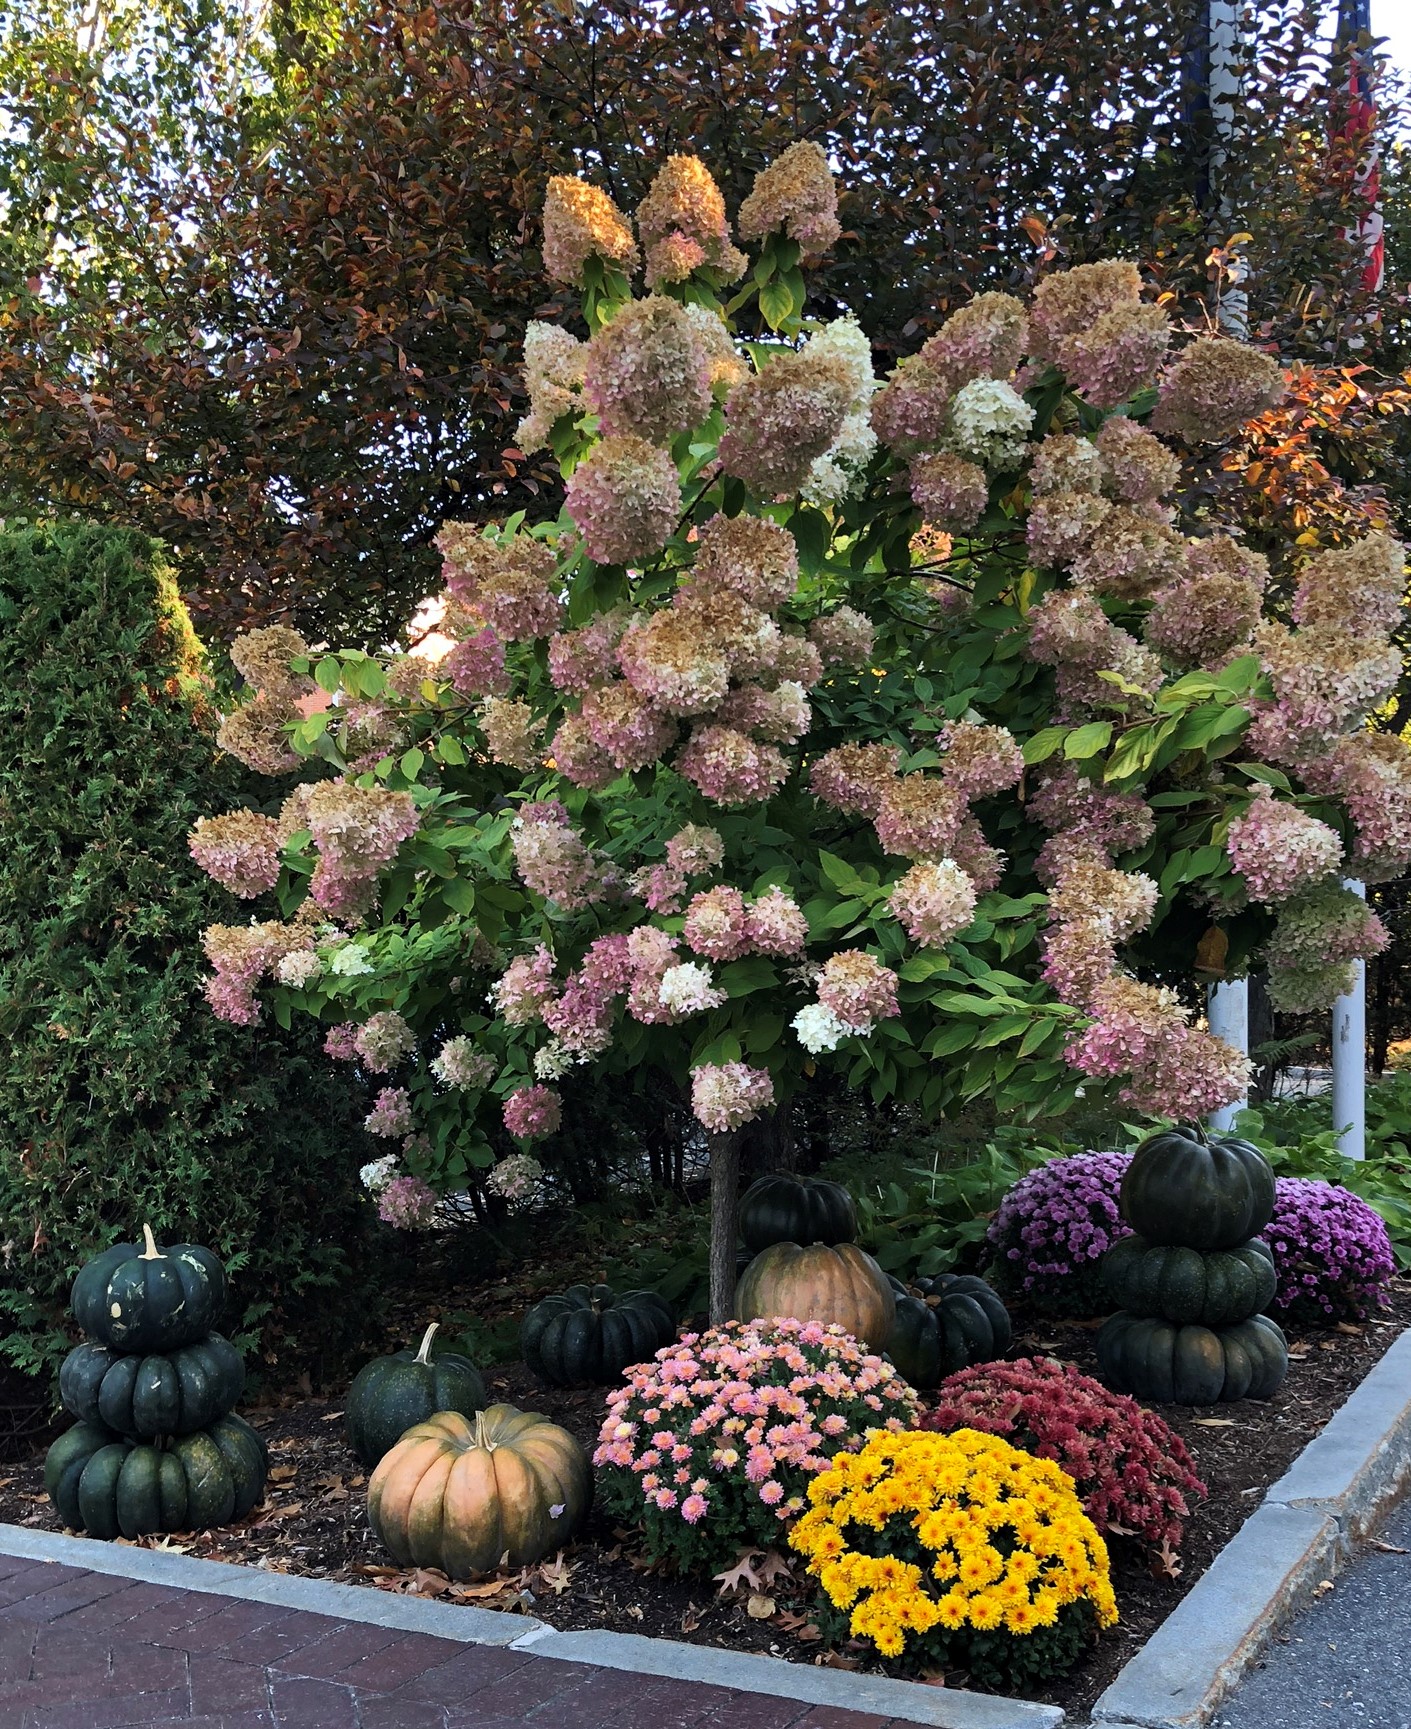 Hydrangea with pumpkins and mums under it for fall decor